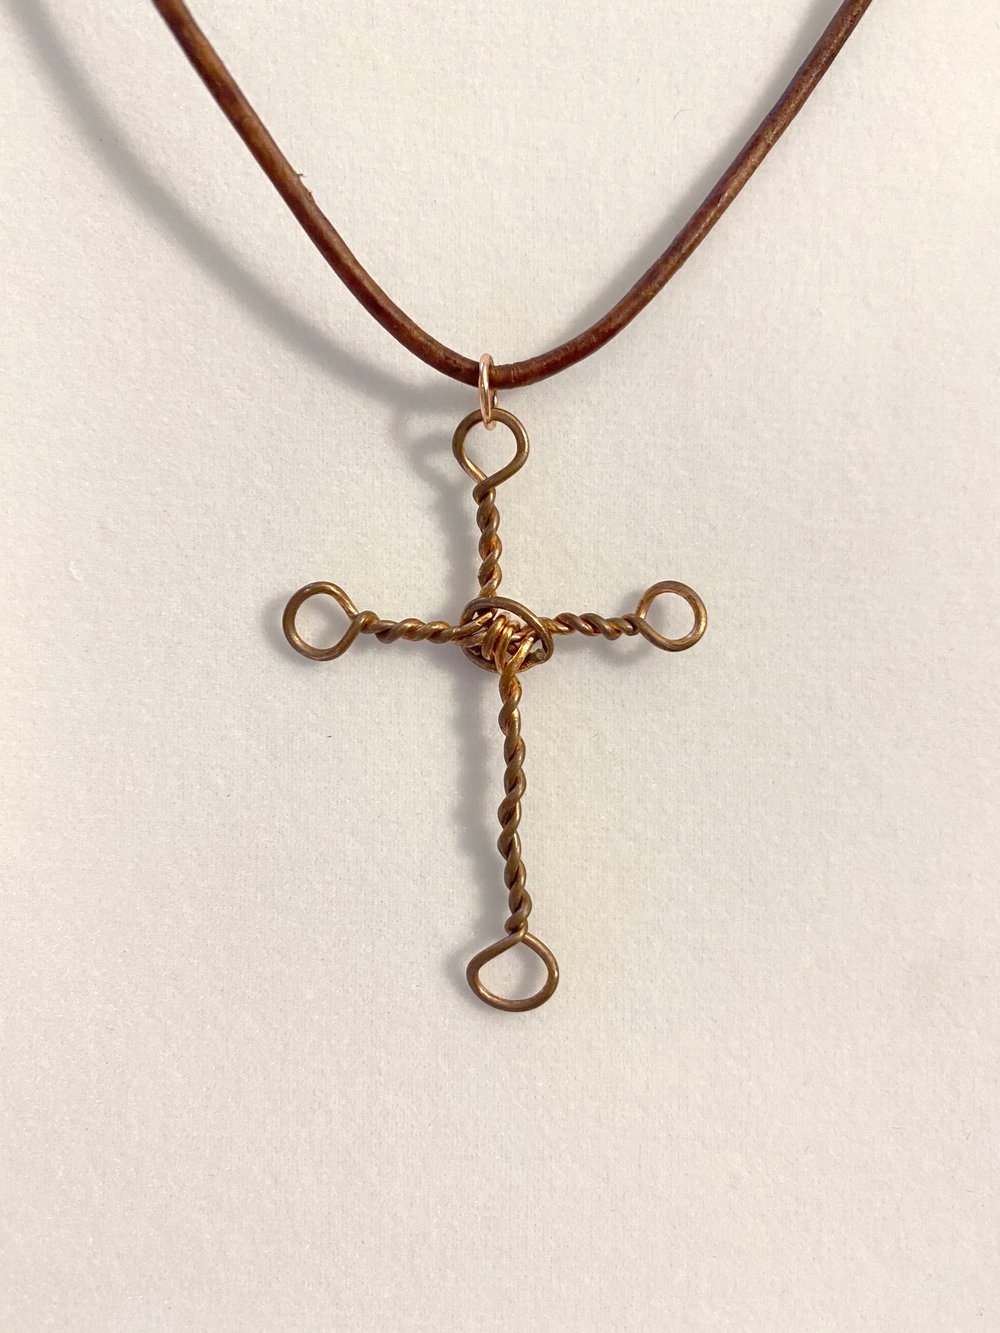 Copper Cross Leather Necklace